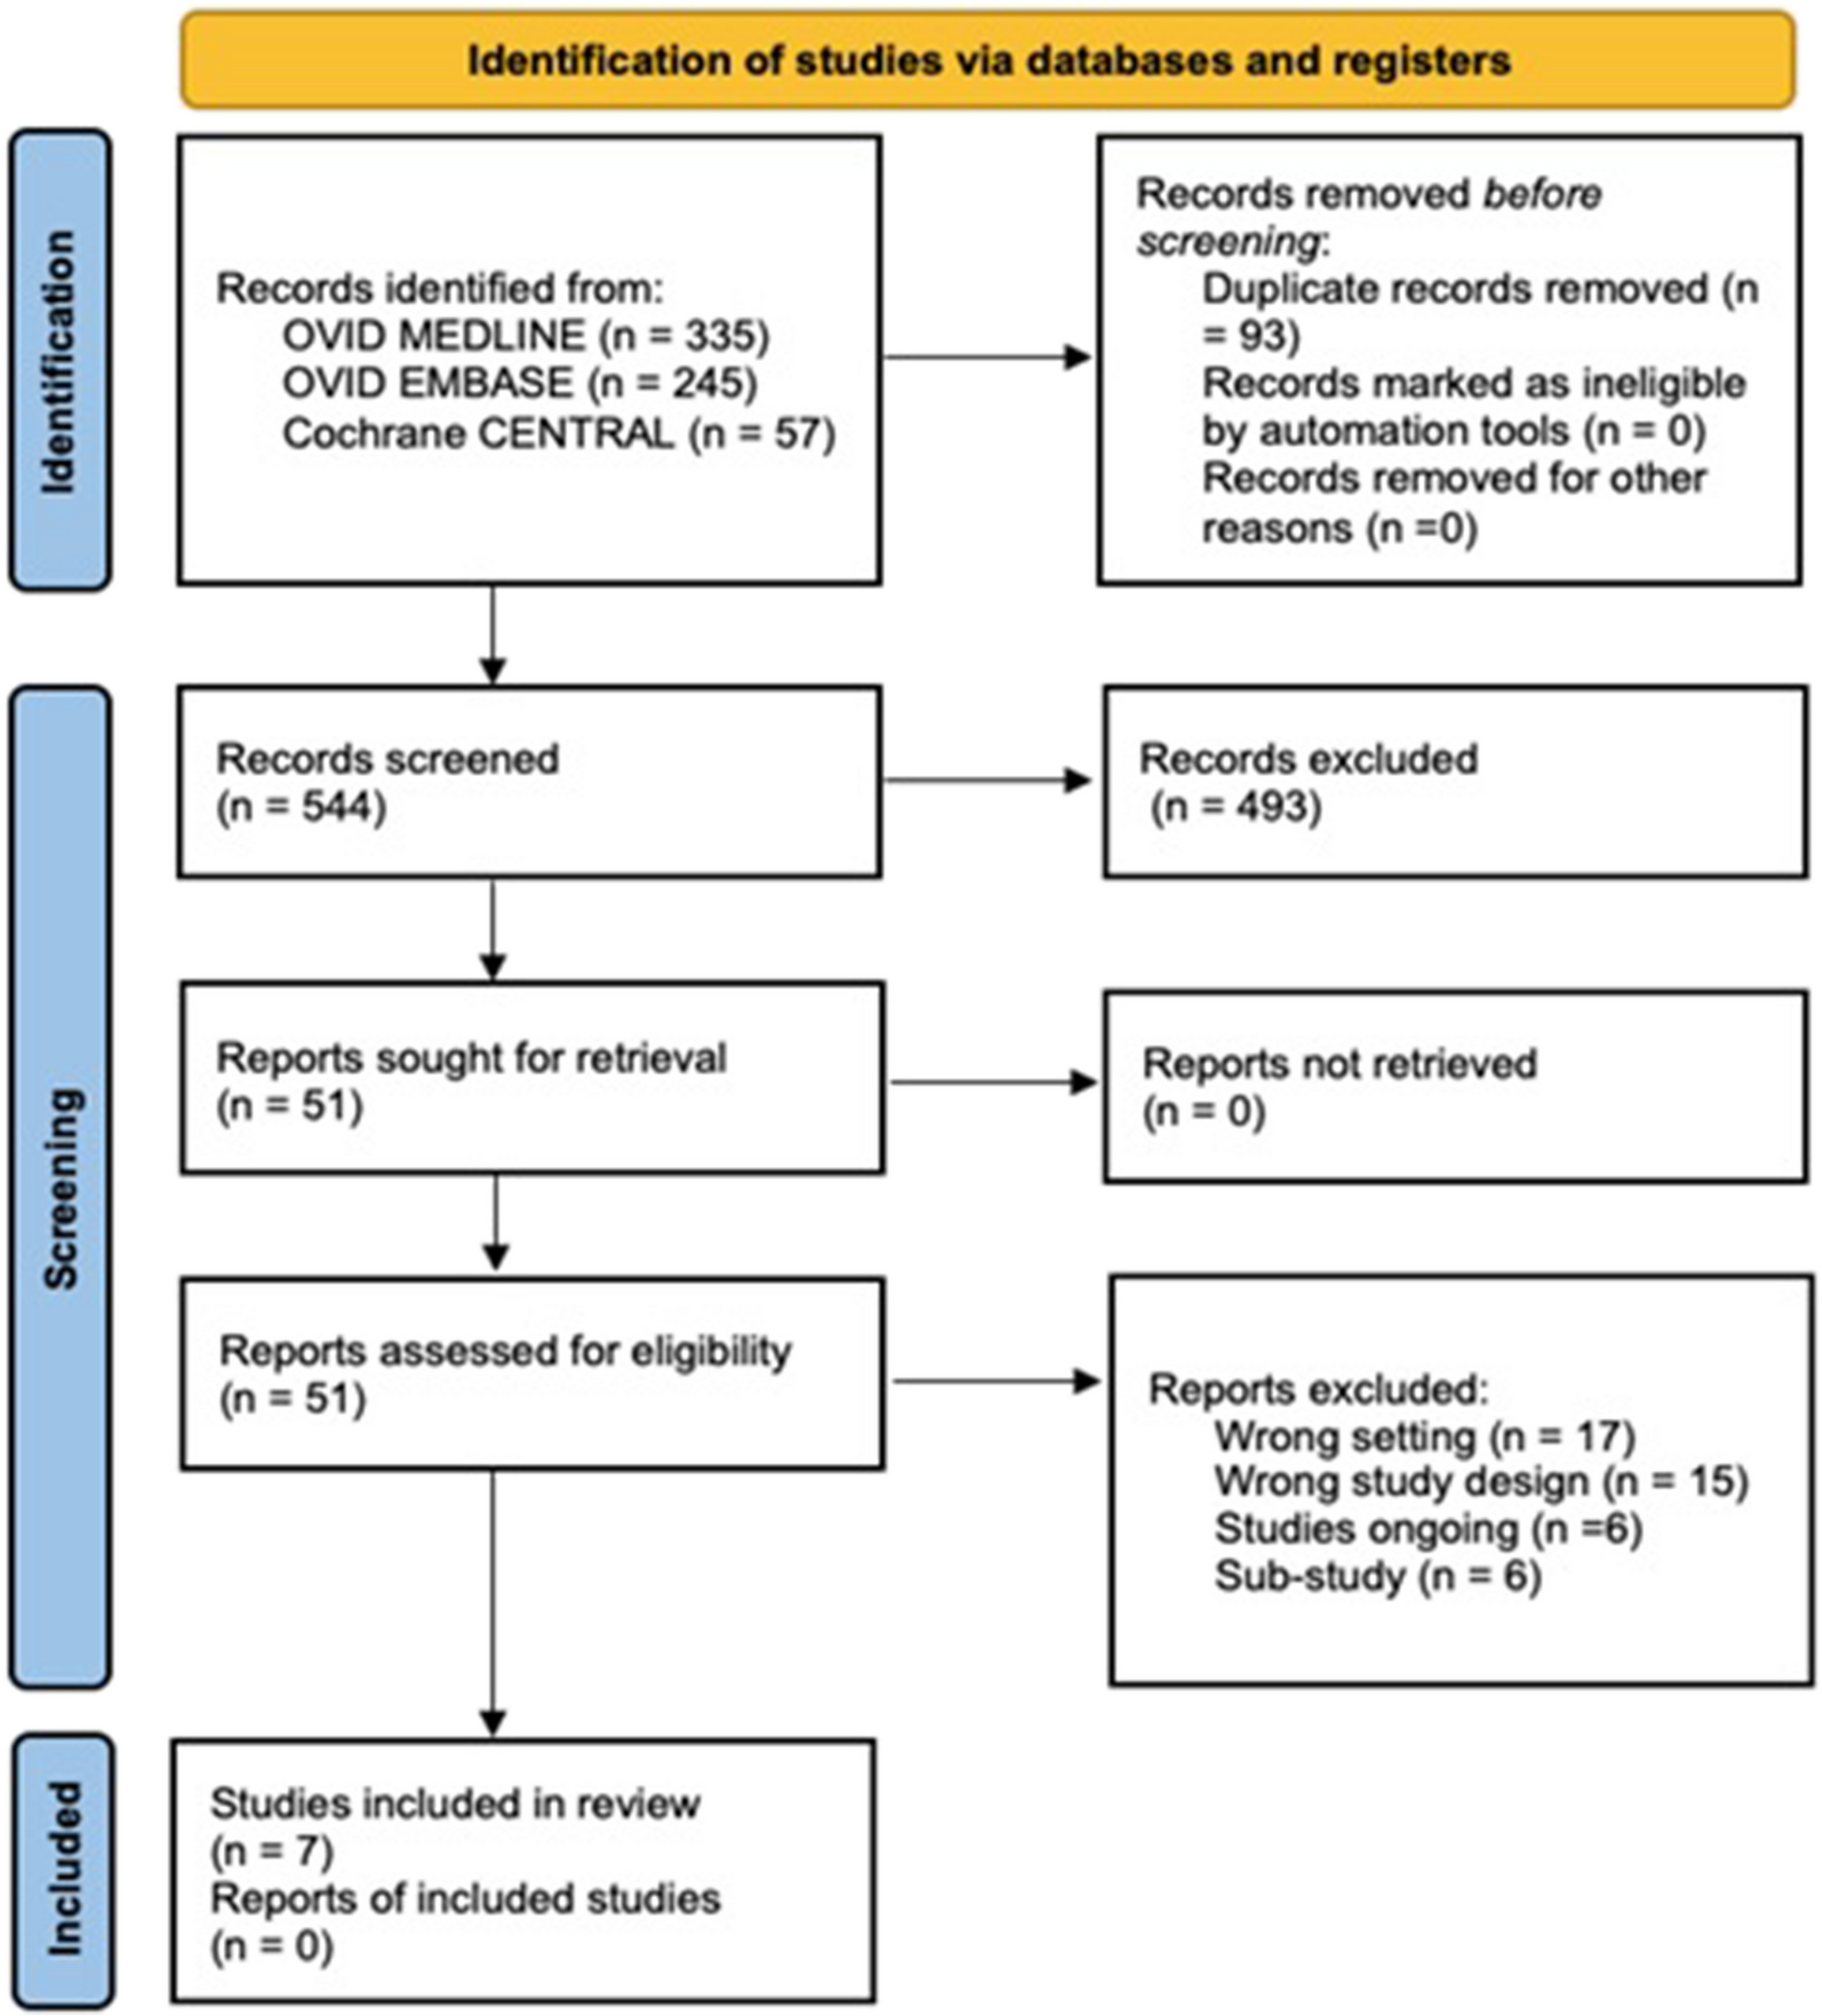 How inclusive were UK-based randomised controlled trials of COVID-19 vaccines? A systematic review investigating enrolment of Black adults and adult ethnic minorities